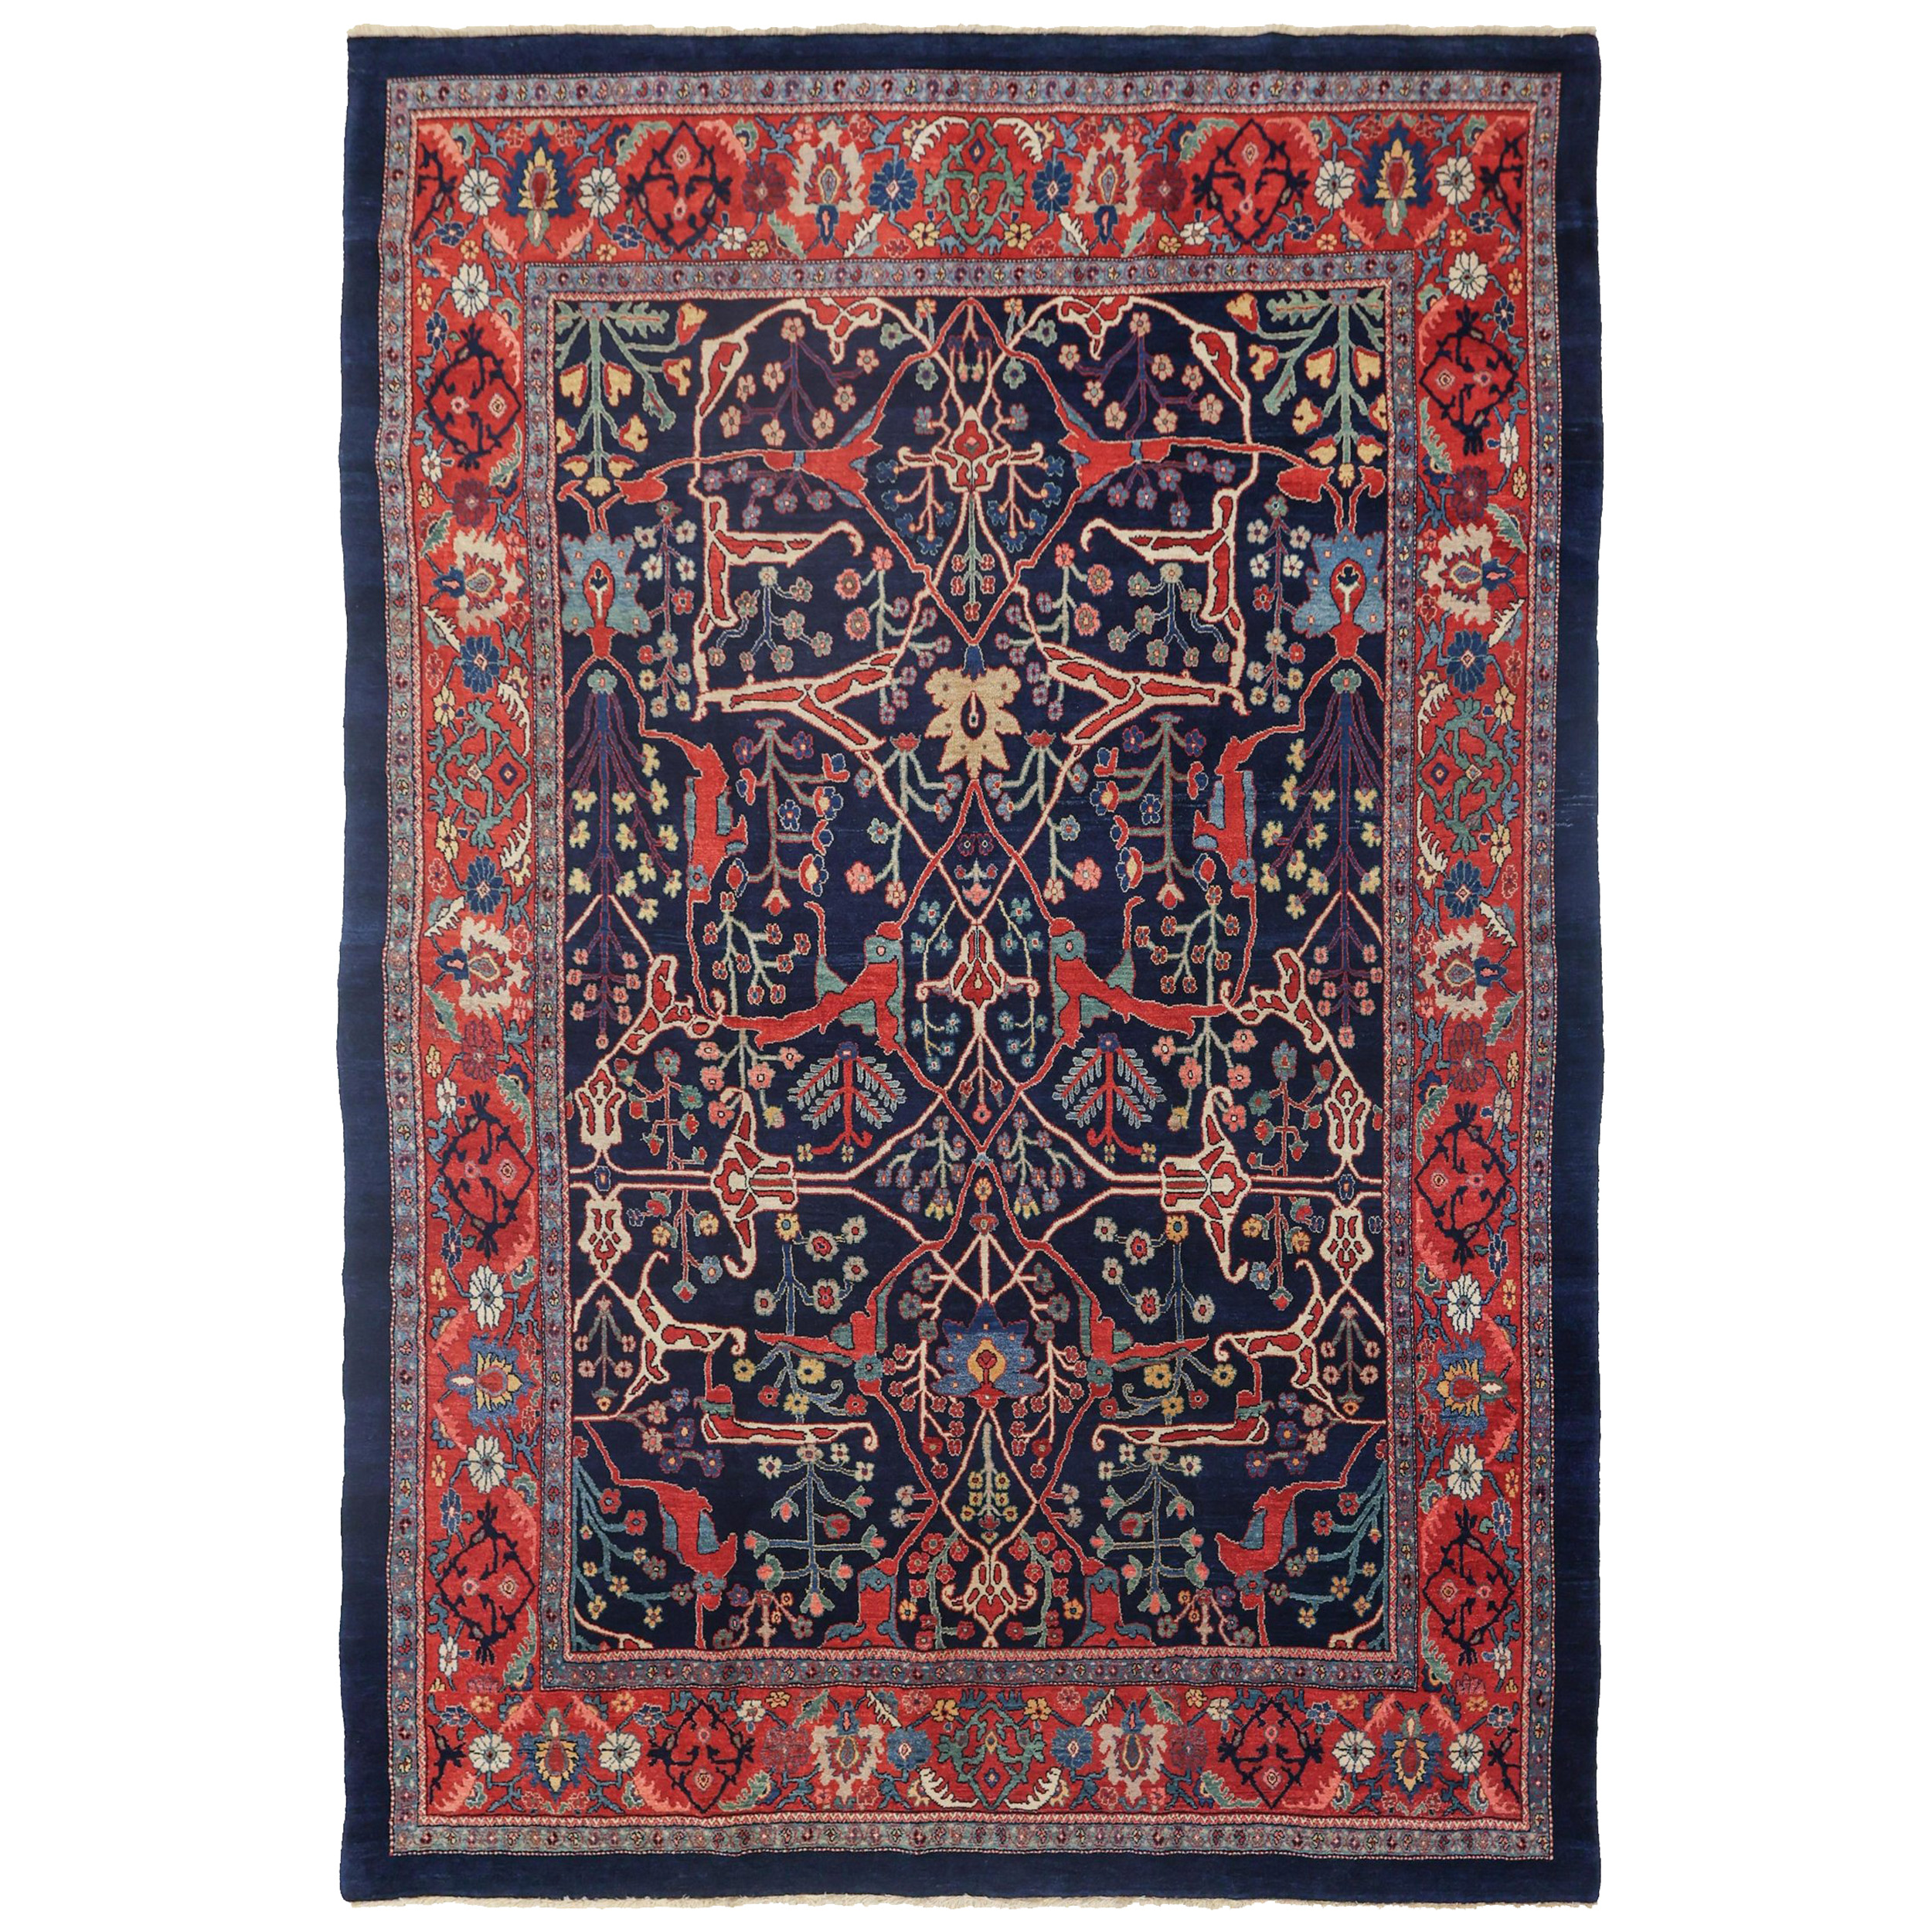 A finely woven contemporary Bidjar carpet, hand woven utilizing natural dyes and hand spun wool. The navy field is decorated with the famous Split Arabesque design and framed by a red border. Douglas Stock Gallery, new hand woven Oriental rugs Boston,MA area